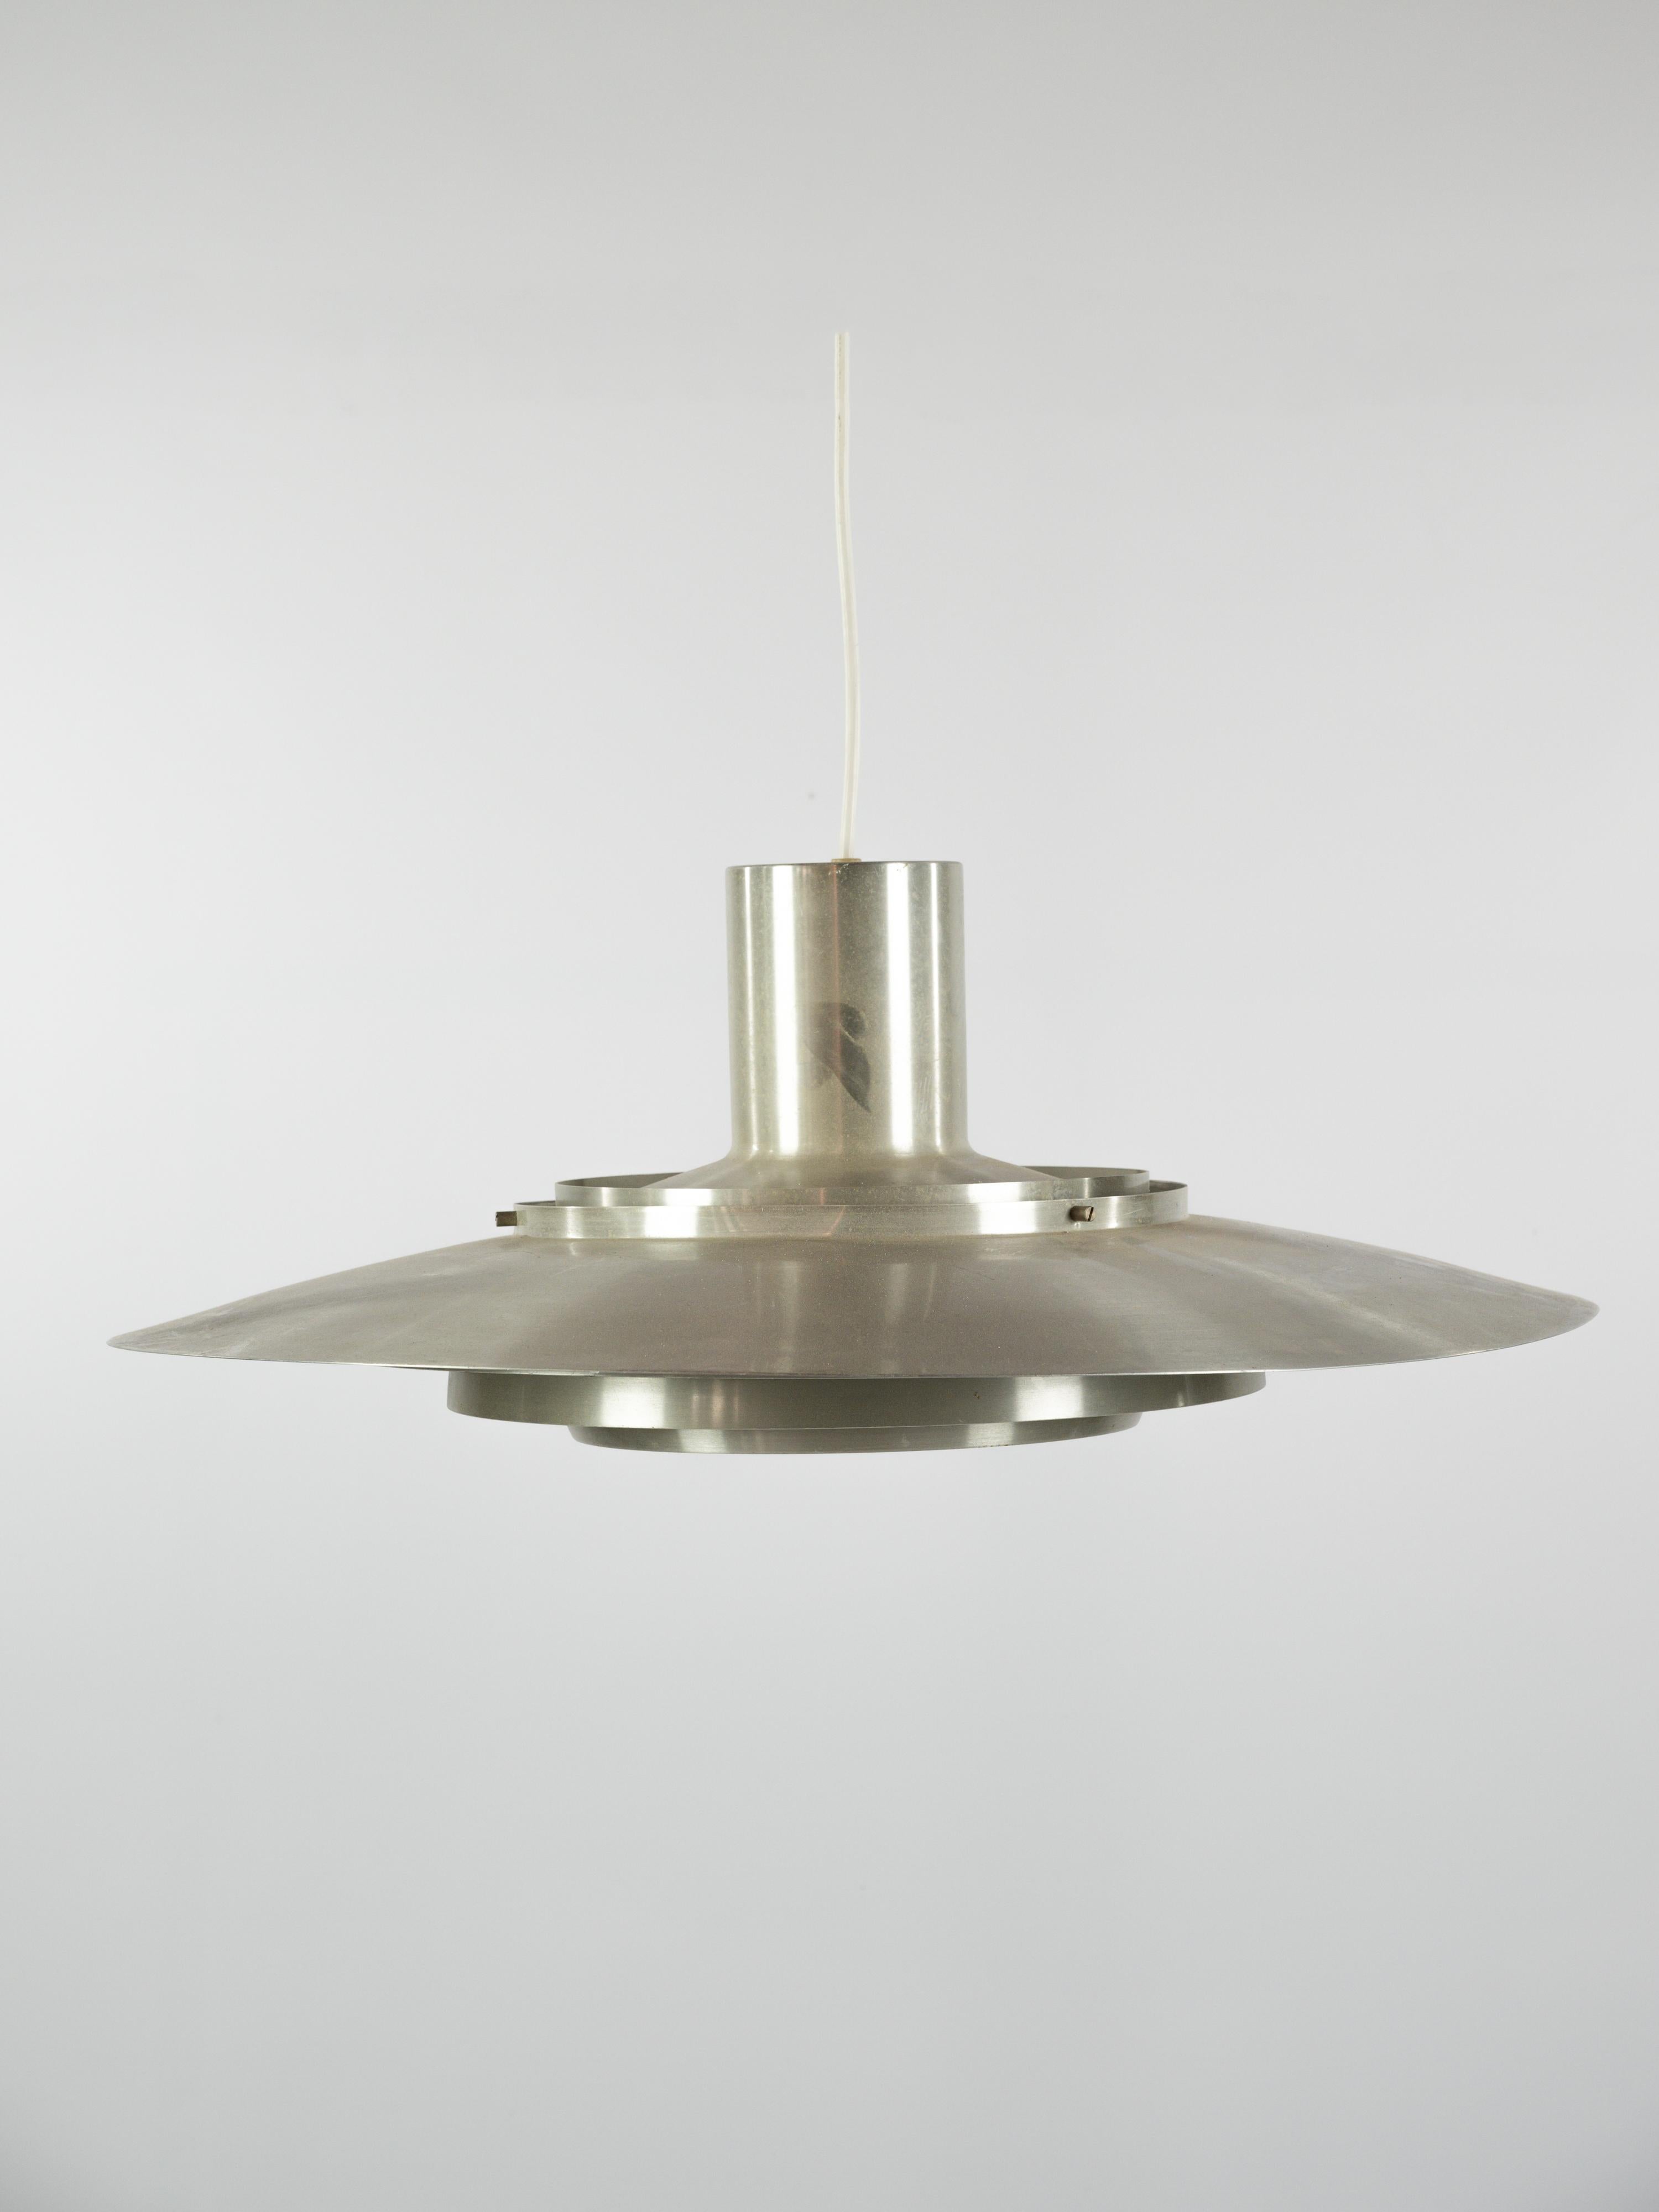 Space Age P376 pendant light design by Preben Fabricius and Jorgen Kastholm for Nordisk Solar

Aluminium 

Nordisk Salor label on the top 

Design 1964, production between 1964-1969

Good condition 

More information upon request 